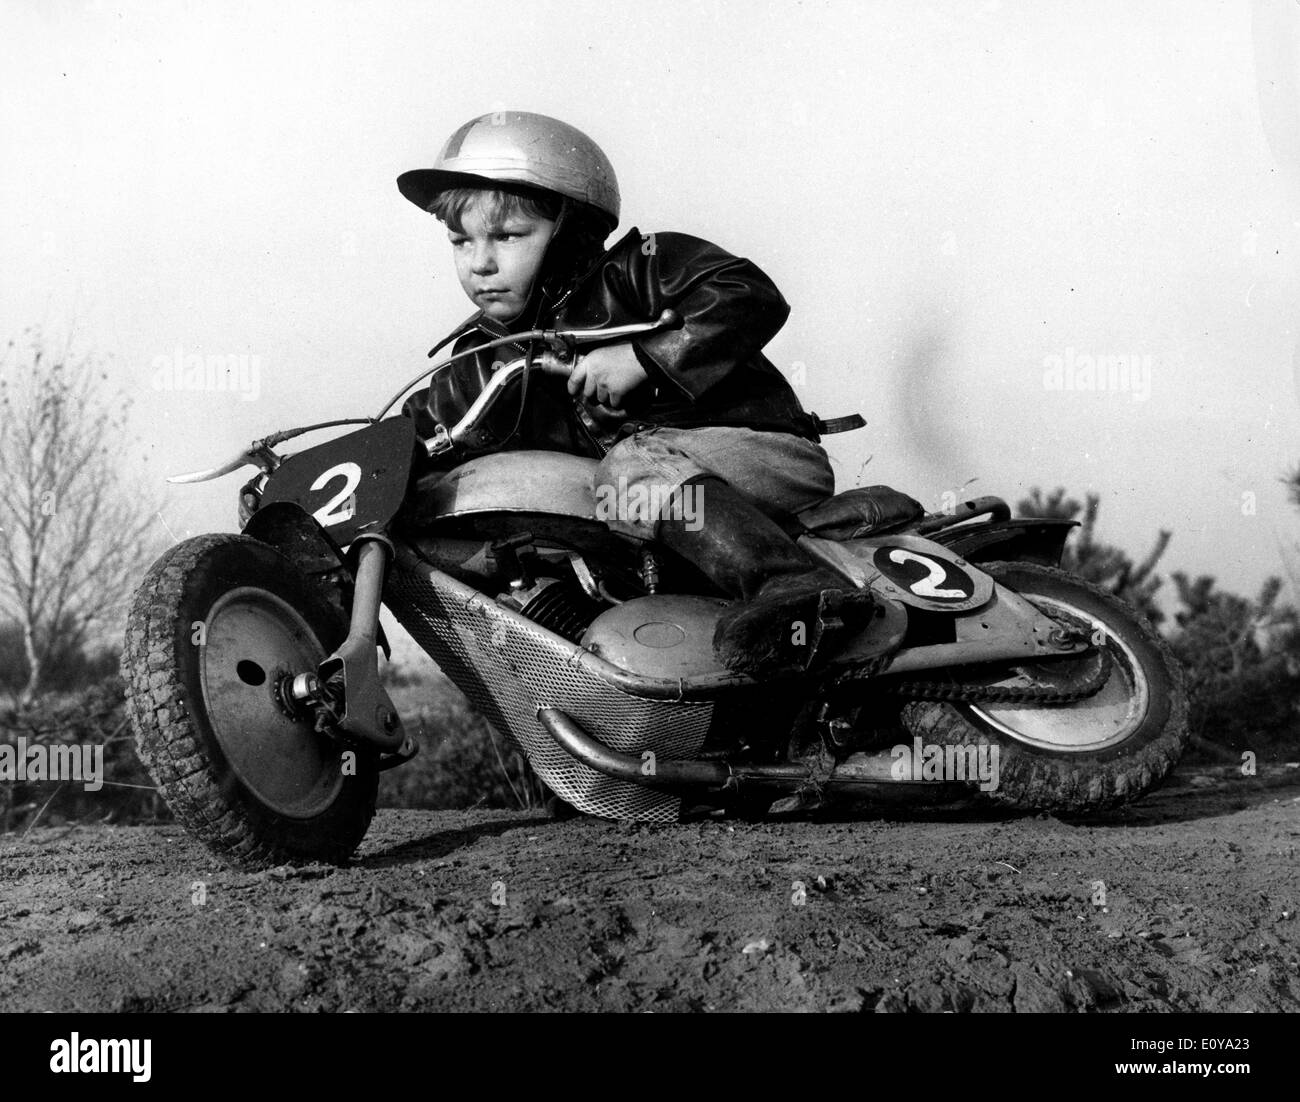 Jun 18, 1969; Surrey, UK; The dare devil, KEIR DOE, five year old speed ace, on the motor-bike which his father built him. Stock Photo